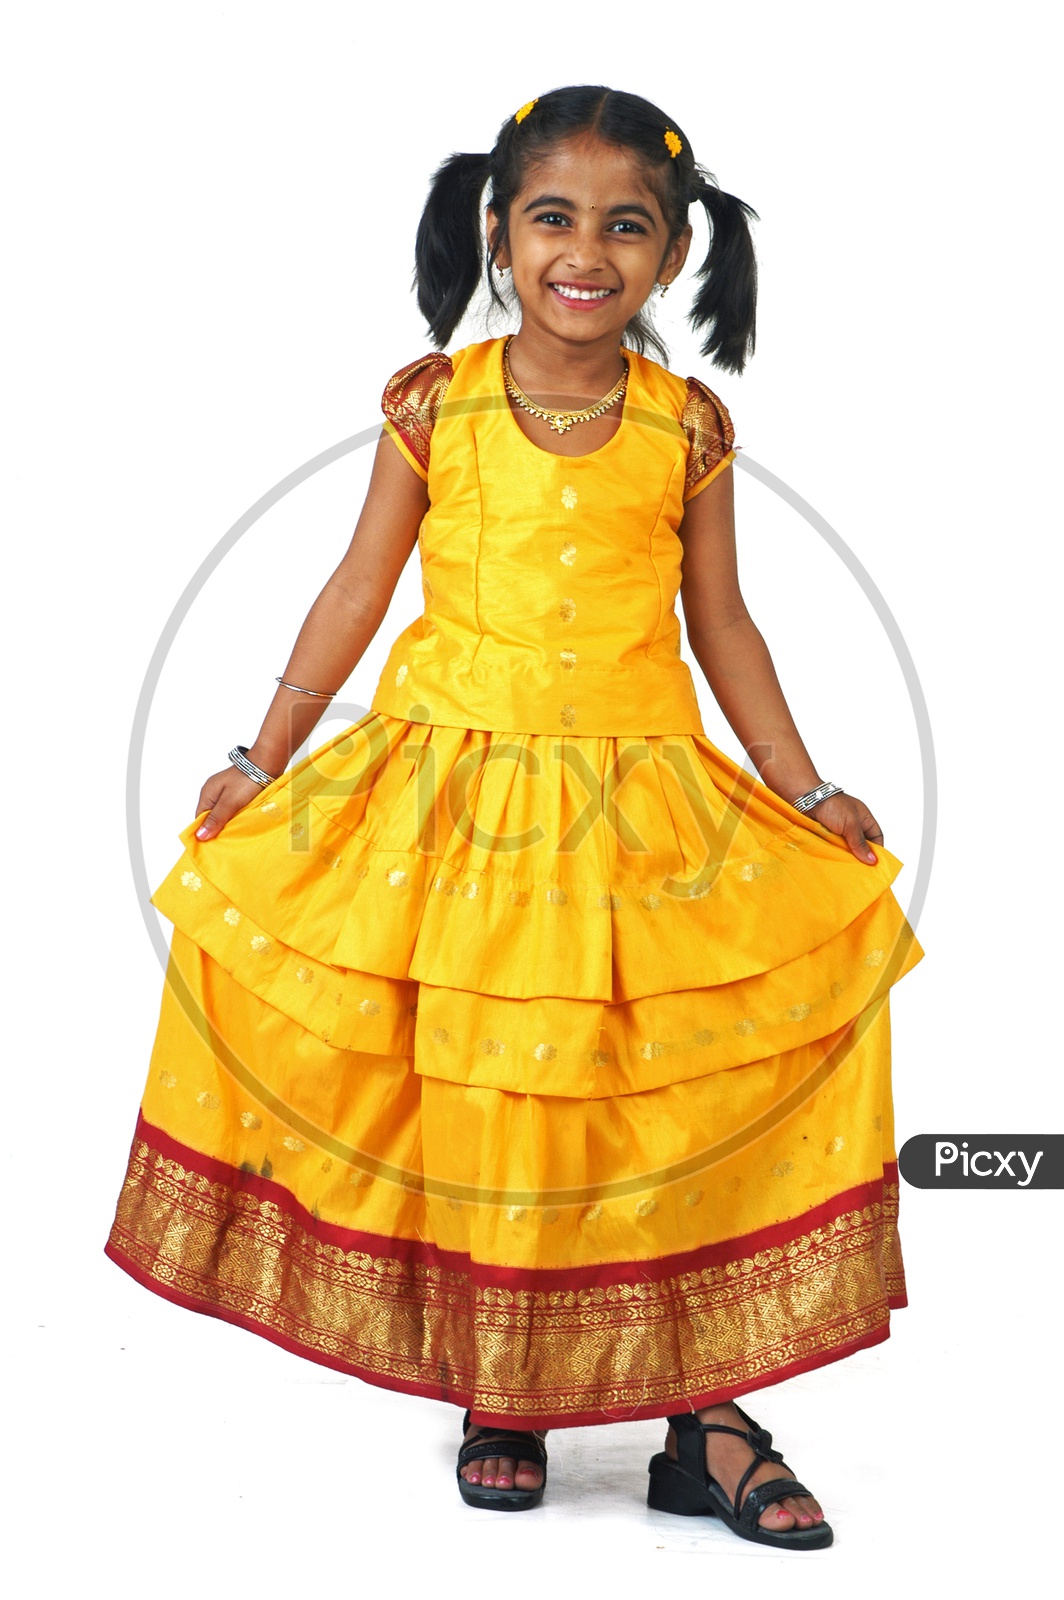 A little girl wearing traditional attire